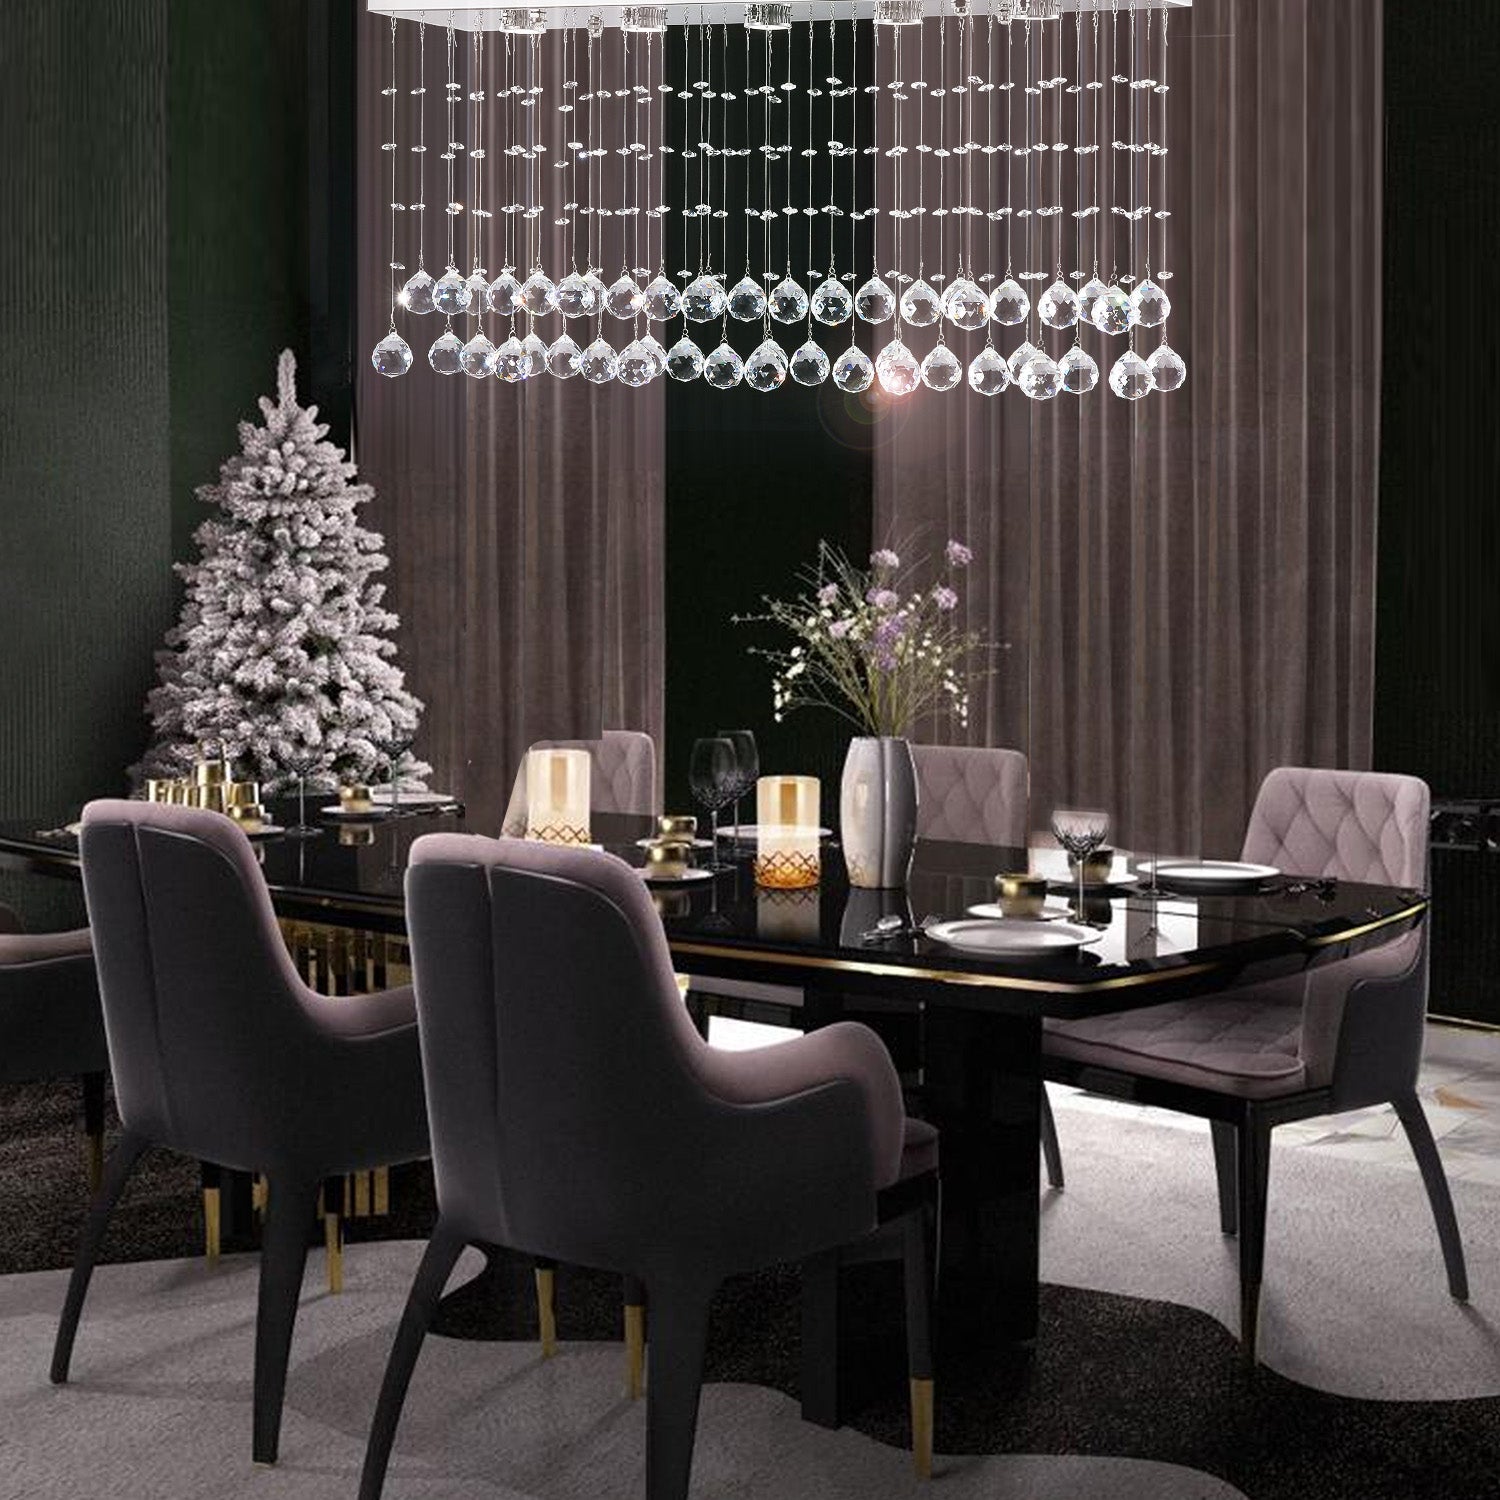 Modern Dining Room Chandeliers - 24+ Rectangular Chandelier Designs, Decorating Ideas ... / Industrial chandeliers combine a modern look with an.